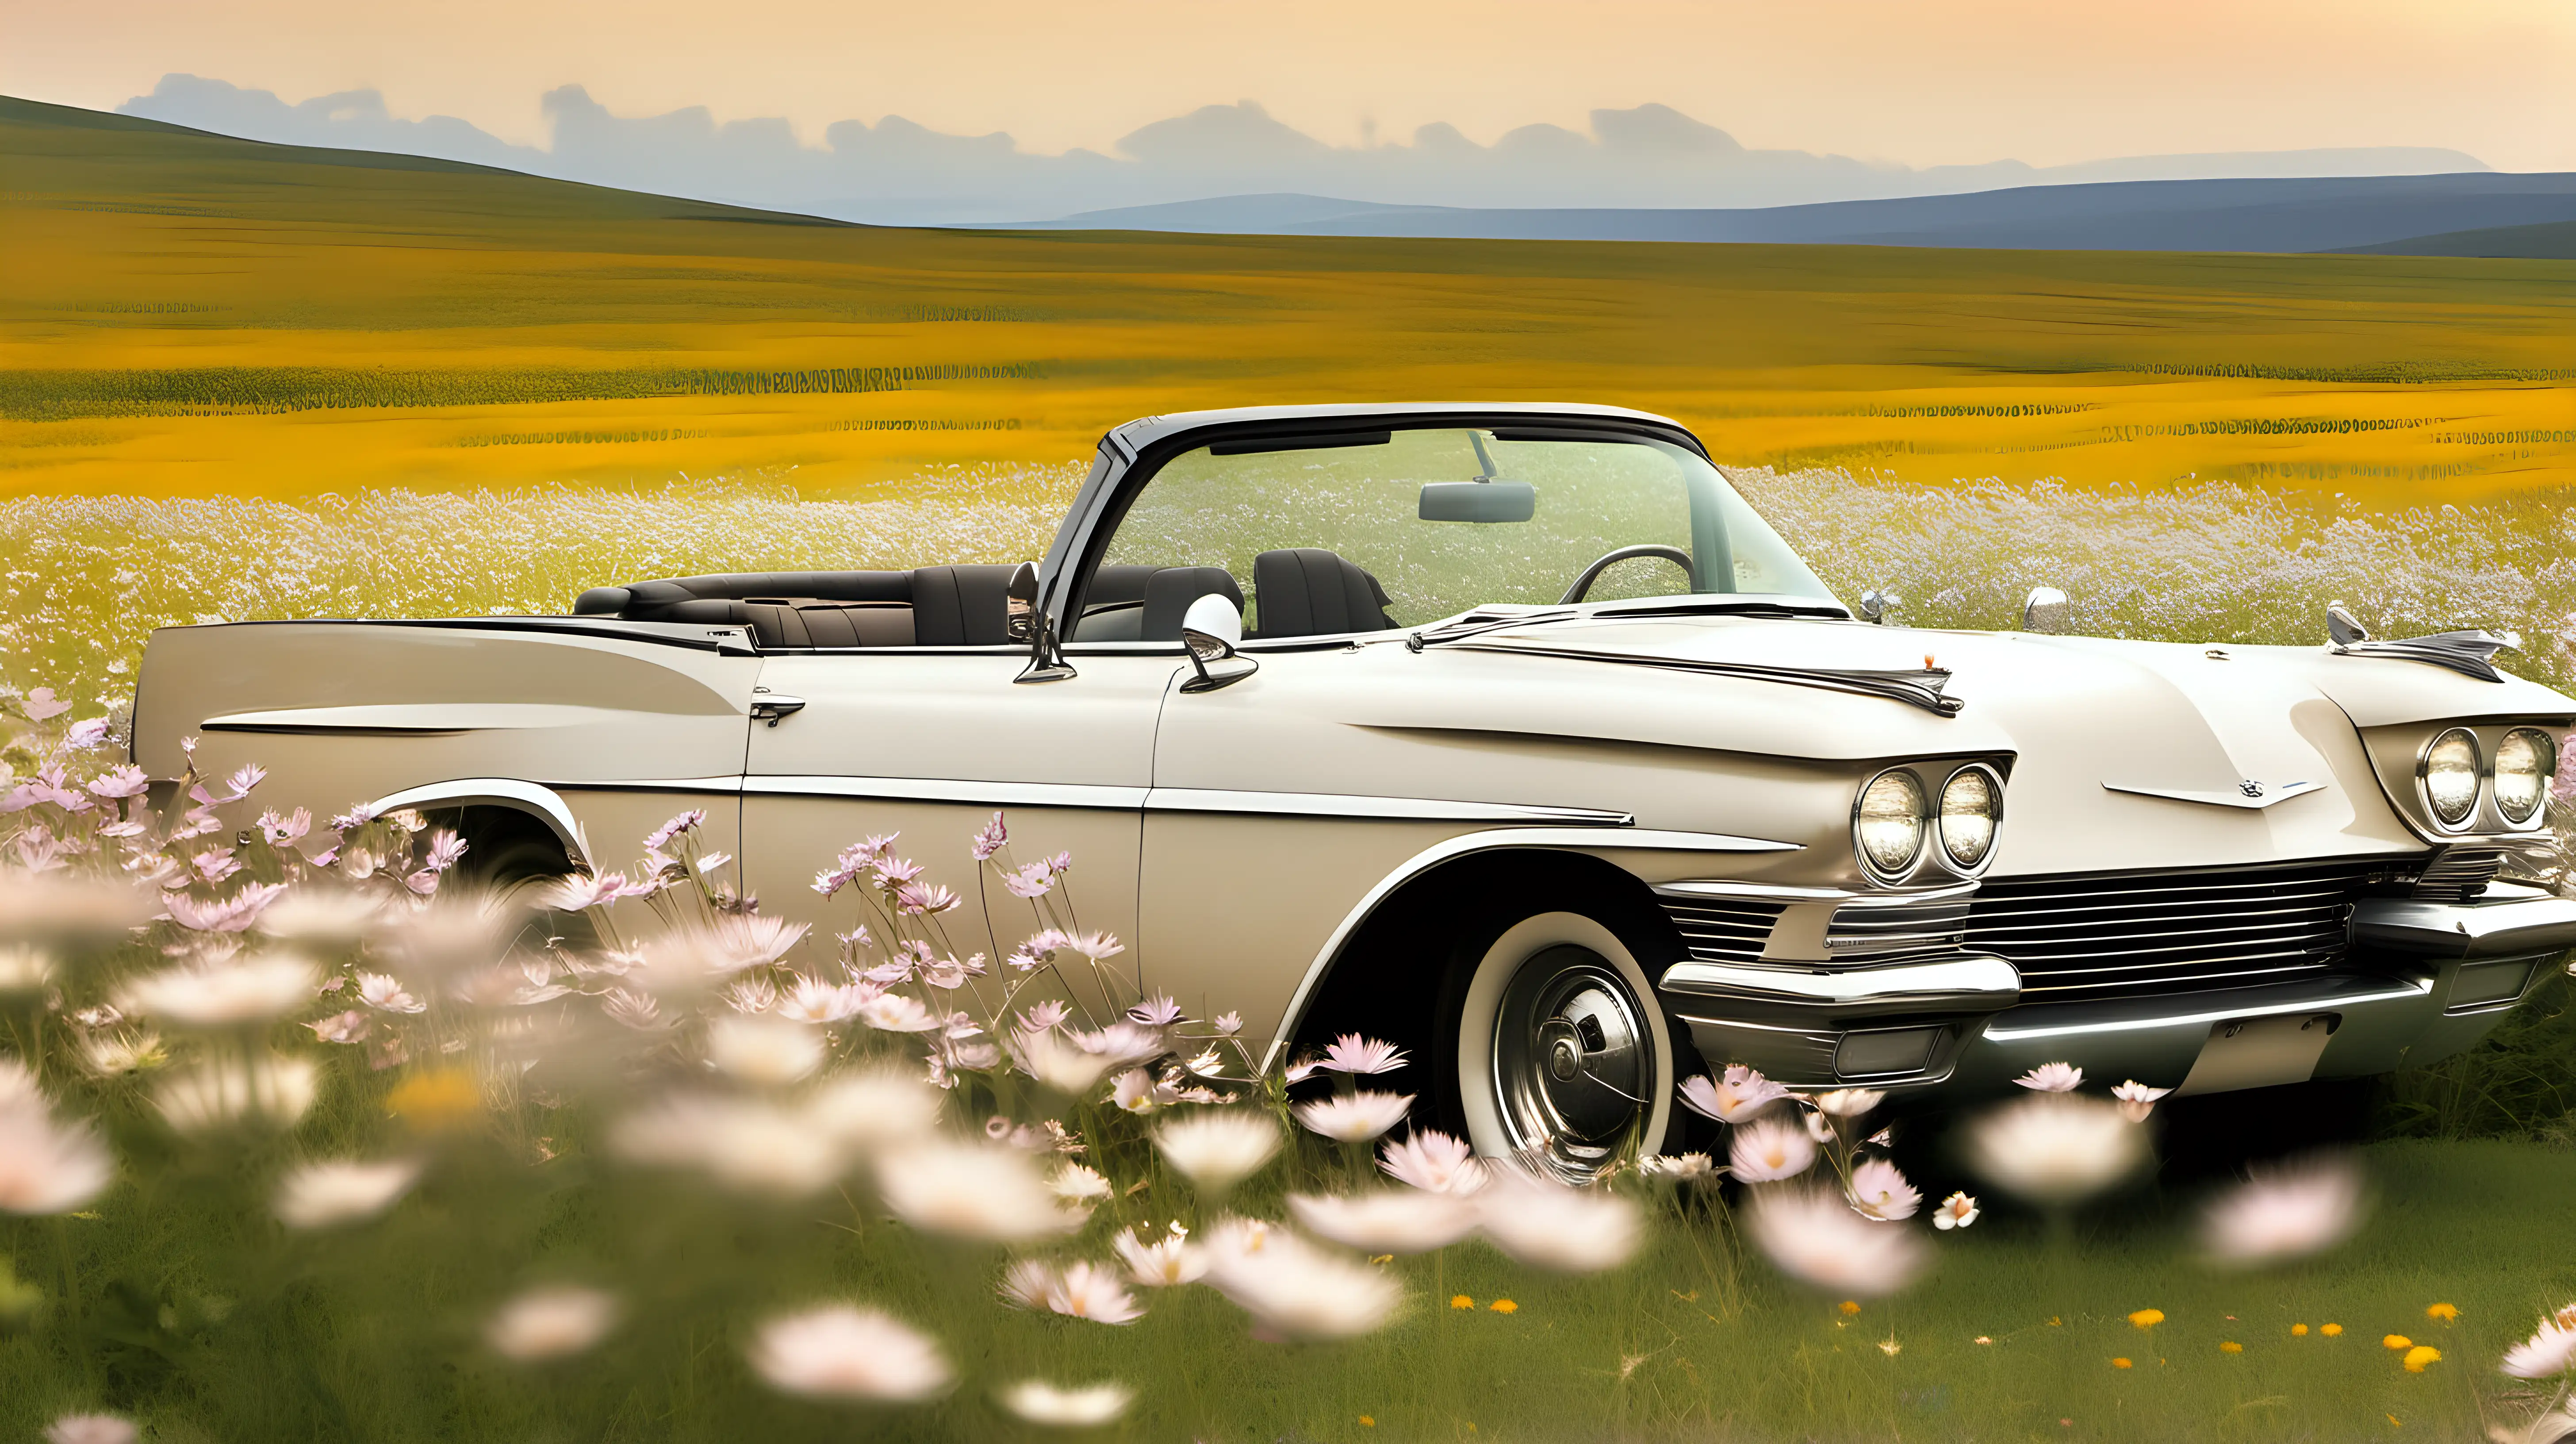 A beautiful ivory-colored convertible parked in a field of wildflowers, the soft petals contrasting with the car's glossy finish.